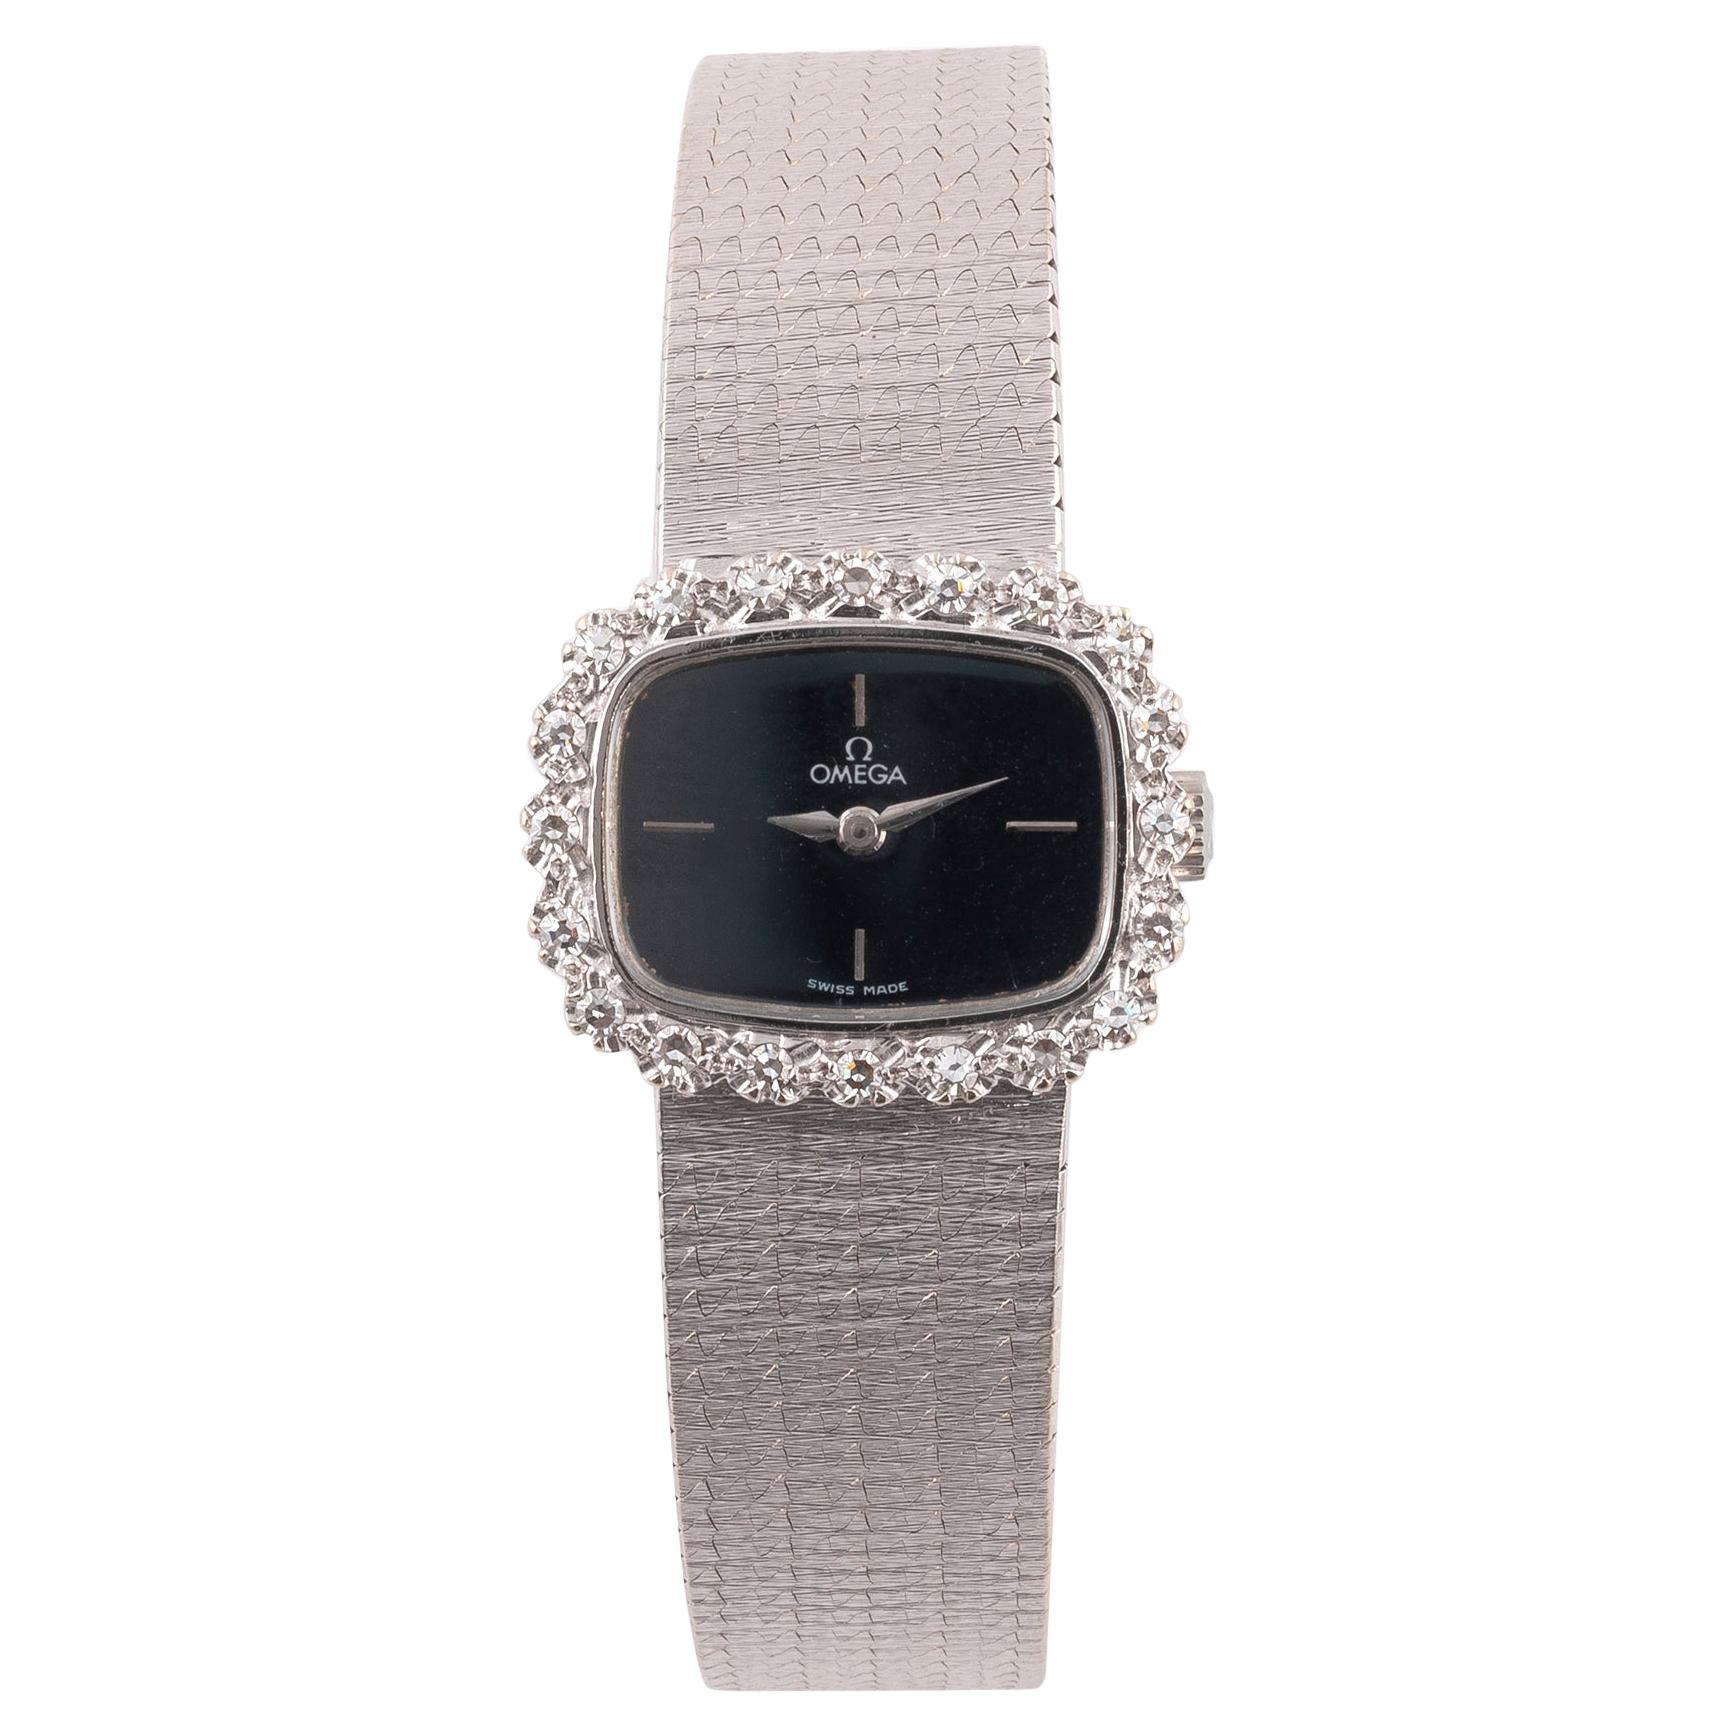 Omega 18kt White Gold and Diamond Cocktail Watch